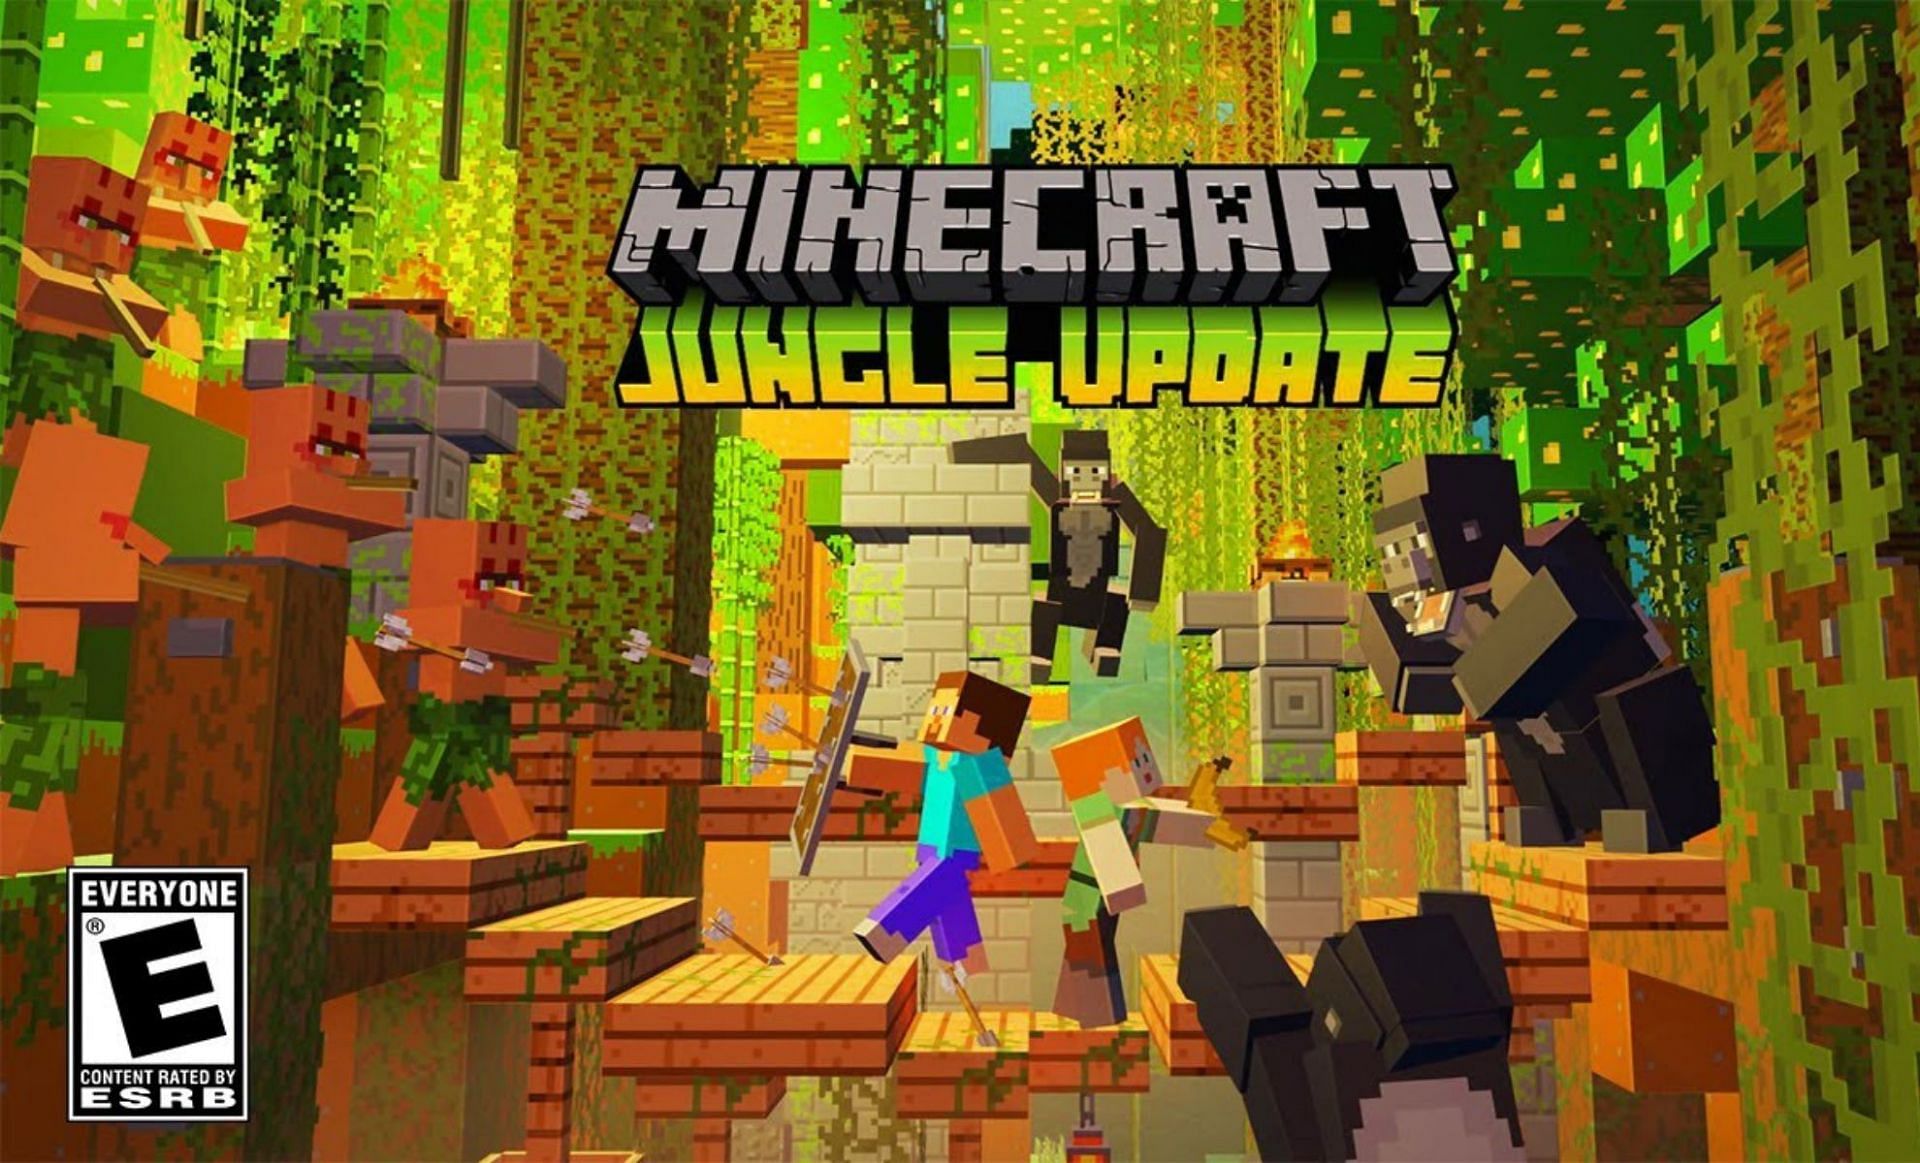 A mockup teaser for the 1.20 update (Image via MinecraftHUB on YouTube)